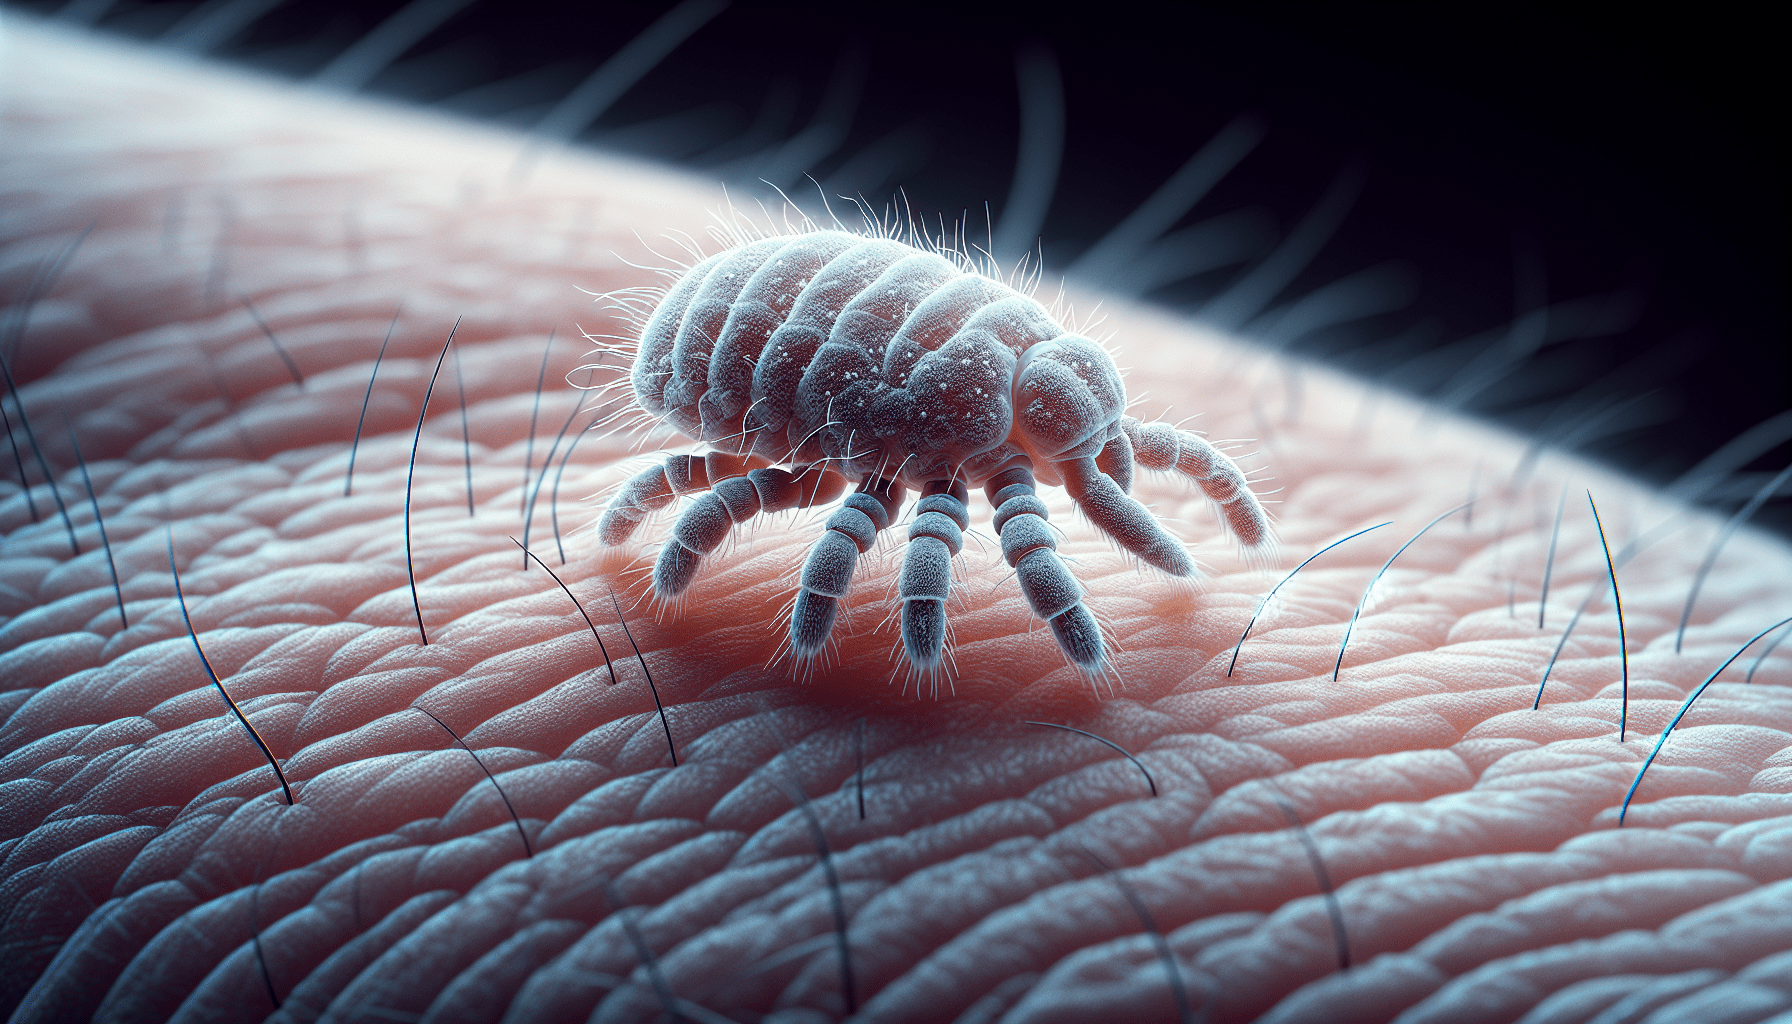 What Animal Does Scabies Come From?